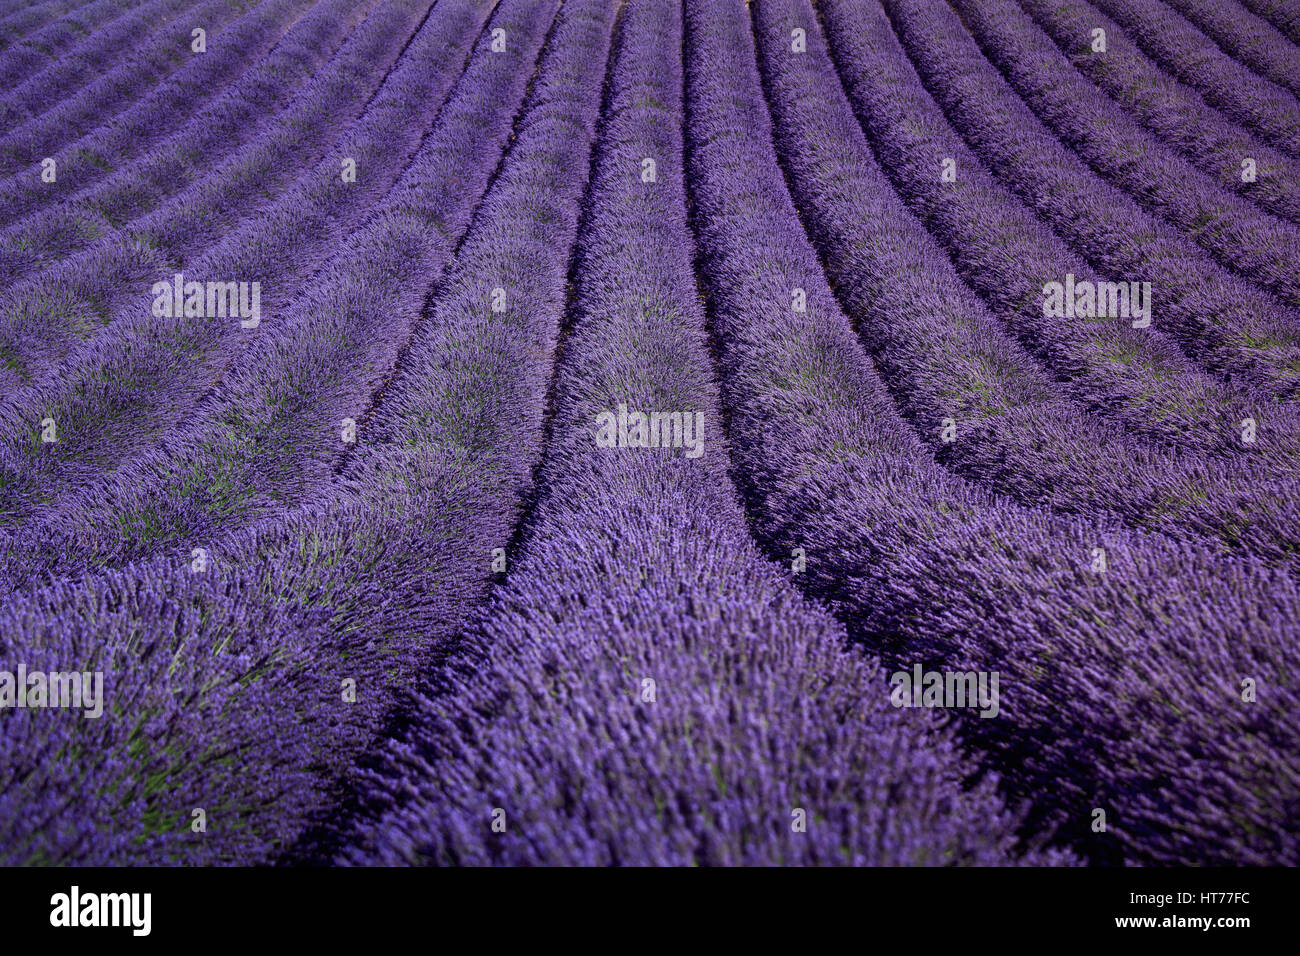 Lavender flower blooming fields in endless rows as a pattern or texture. Landscape in Valensole plateau, Provence, France, Europe. Stock Photo